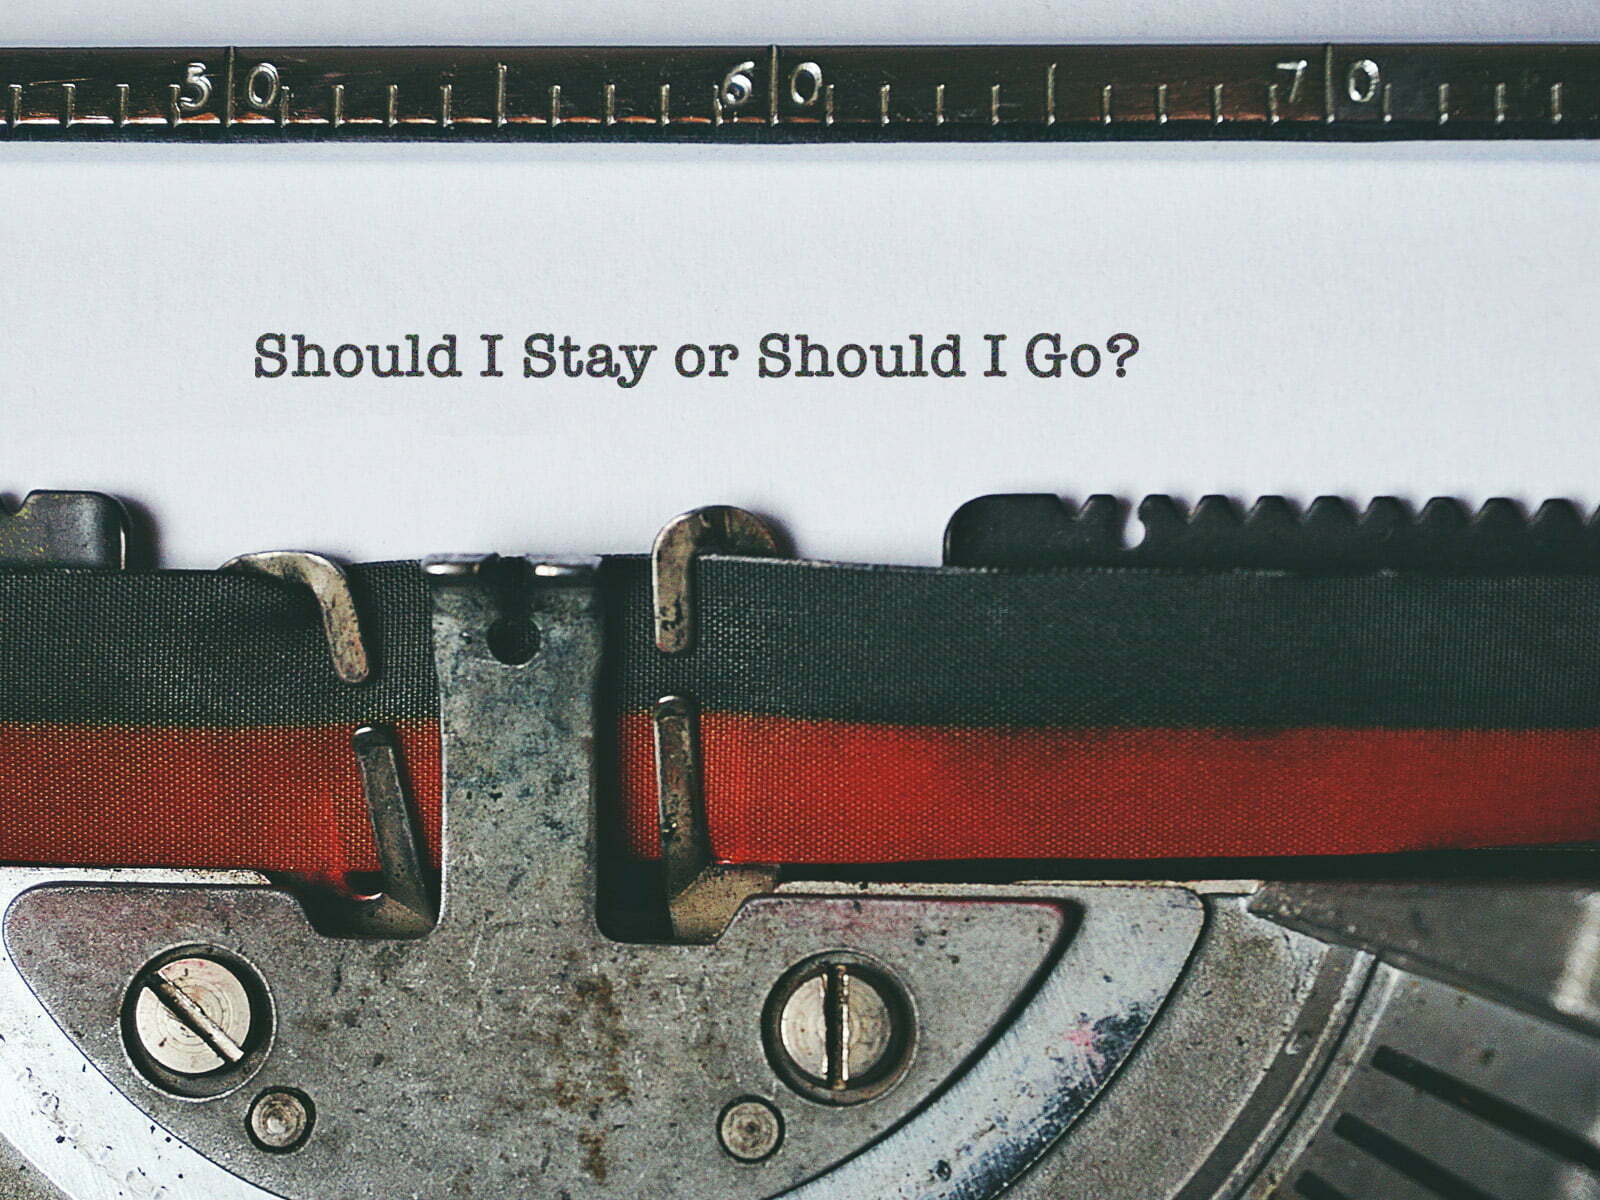 Typewriter with Should I Stay or Should I Go? written on the paper